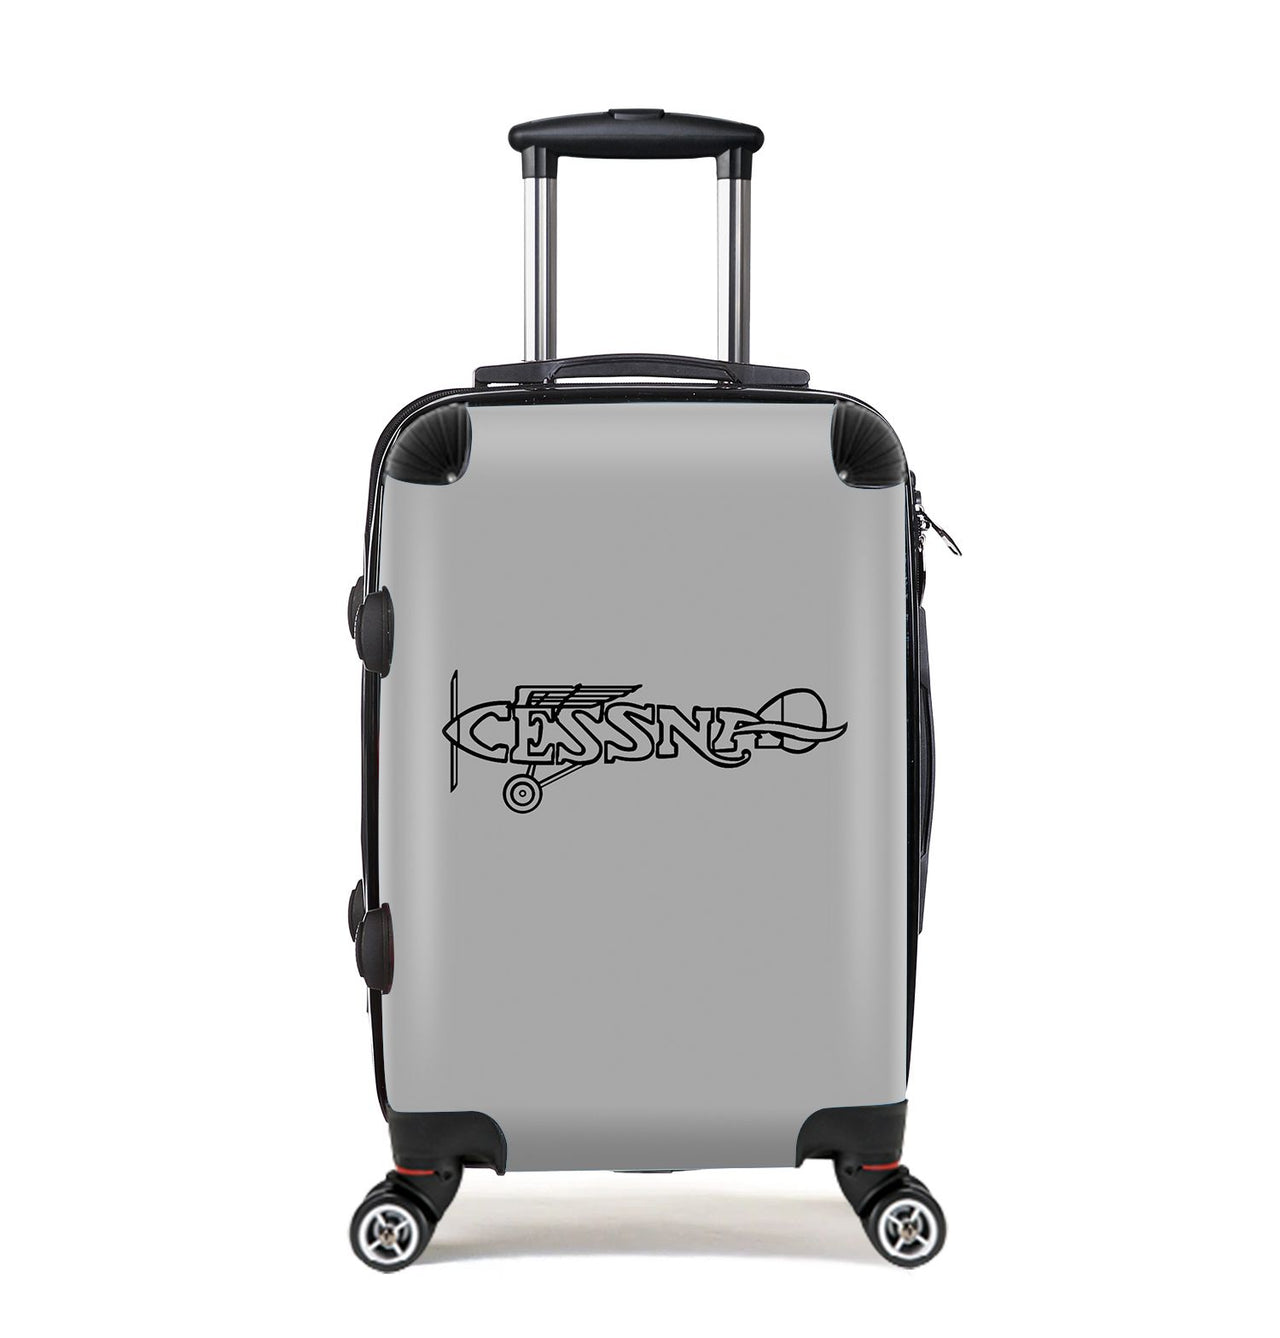 Special Cessna Text Designed Cabin Size Luggages